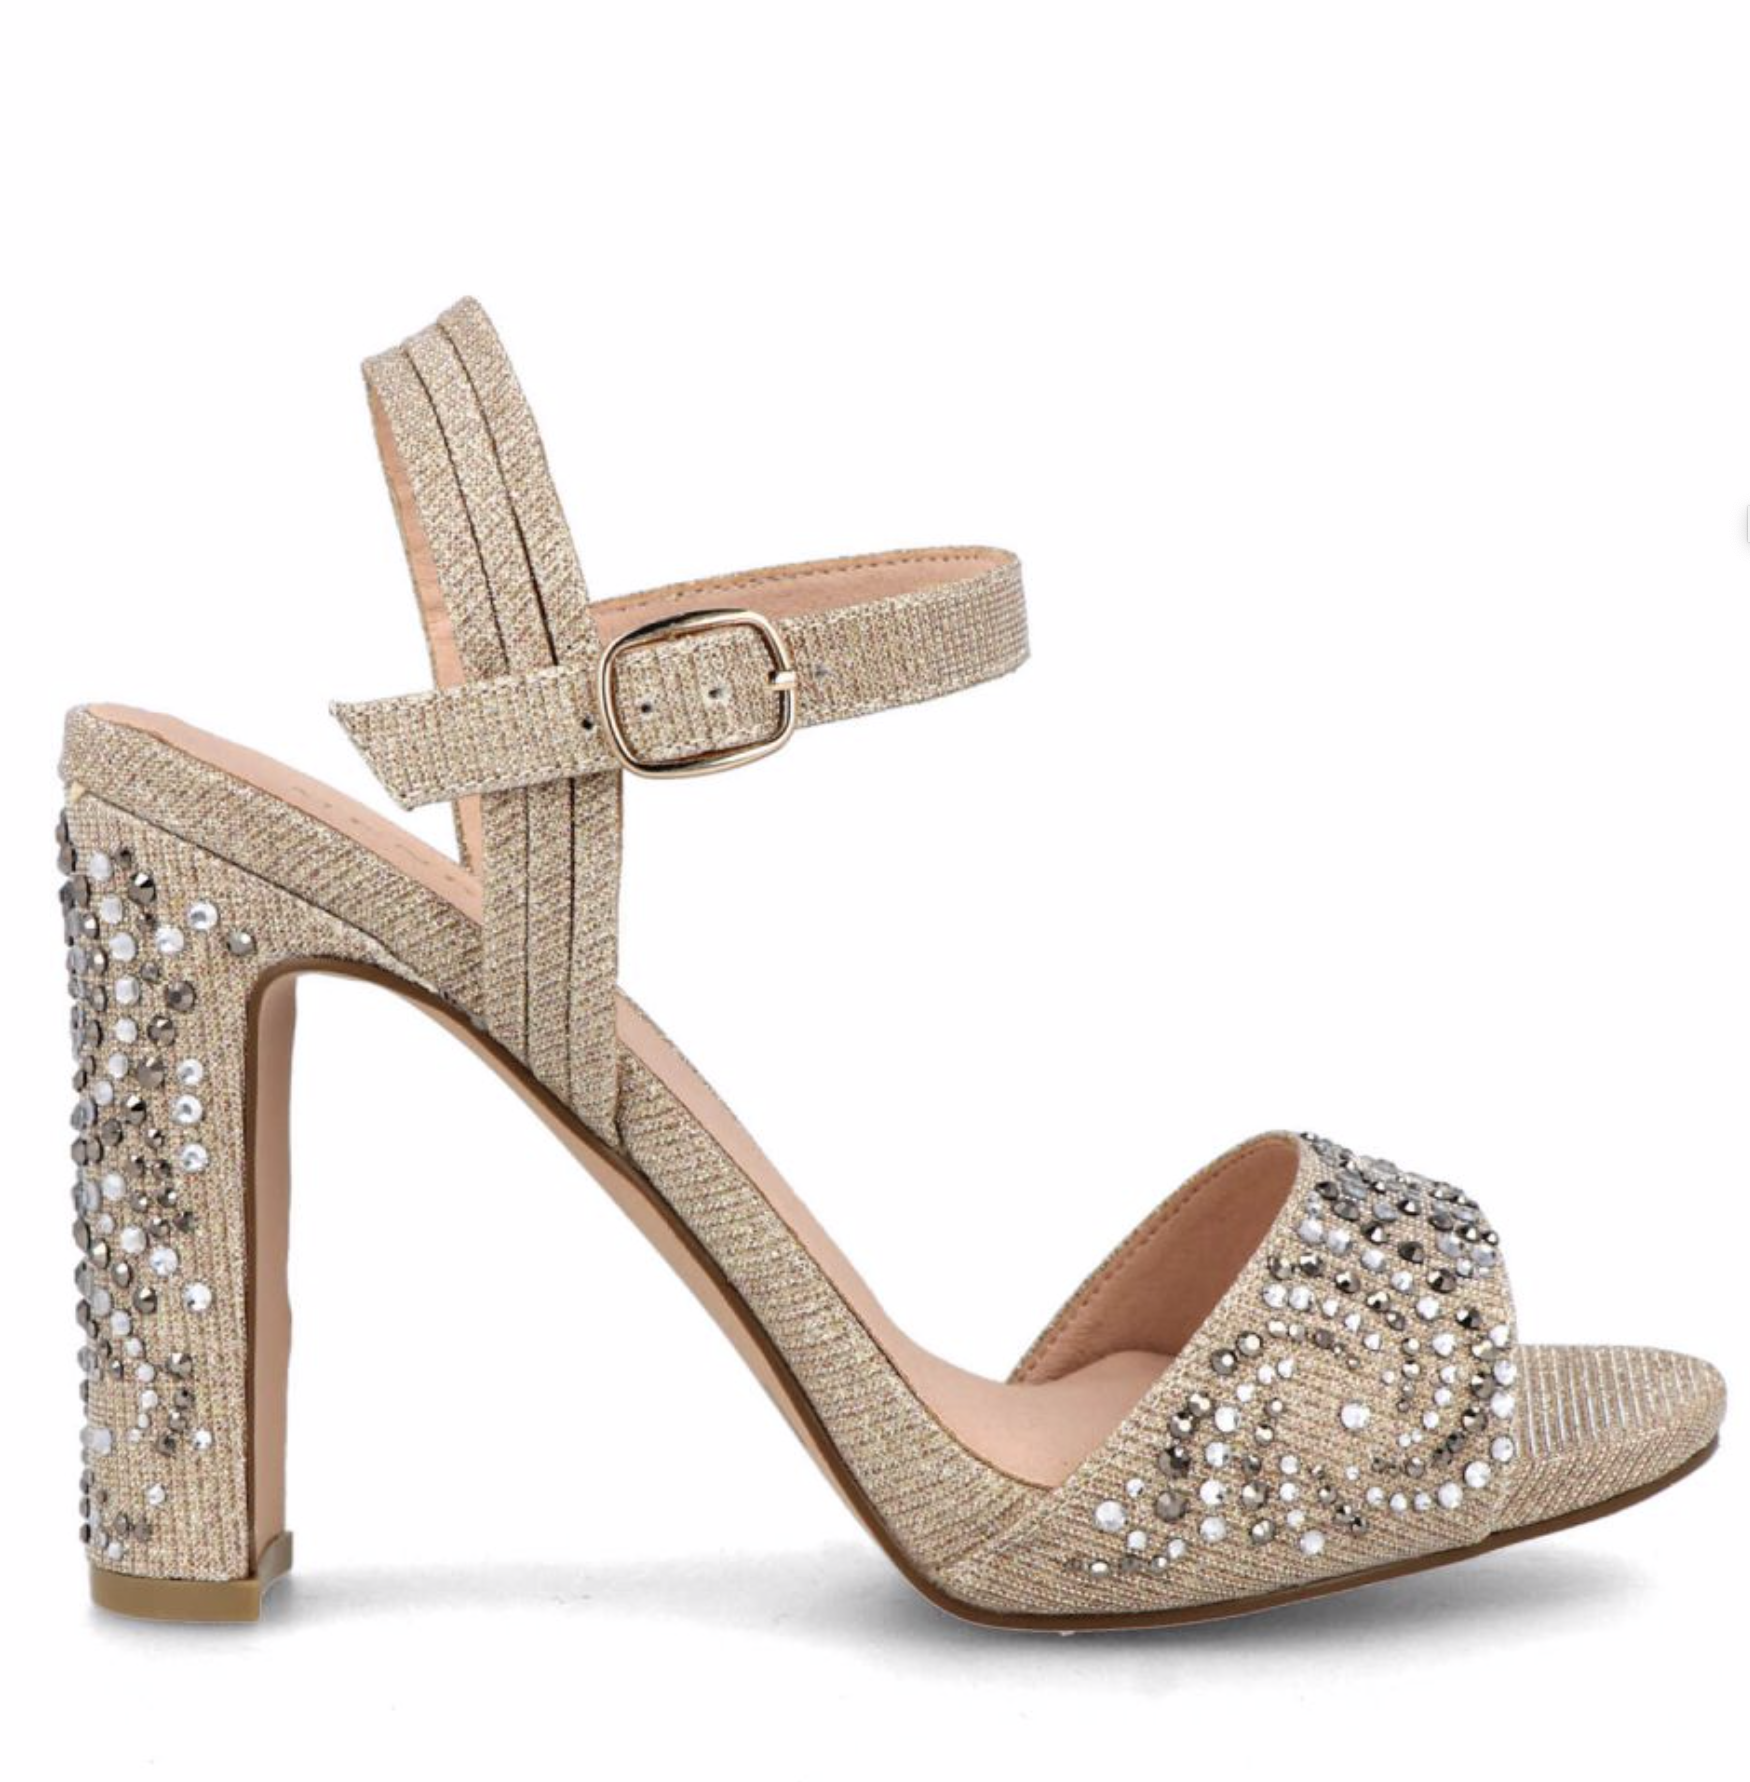 Elegant silver crystal platform bridal heels COMFORTABLE PARTY SHOES WITH  RHINESTONES OPEN TOE STYLE